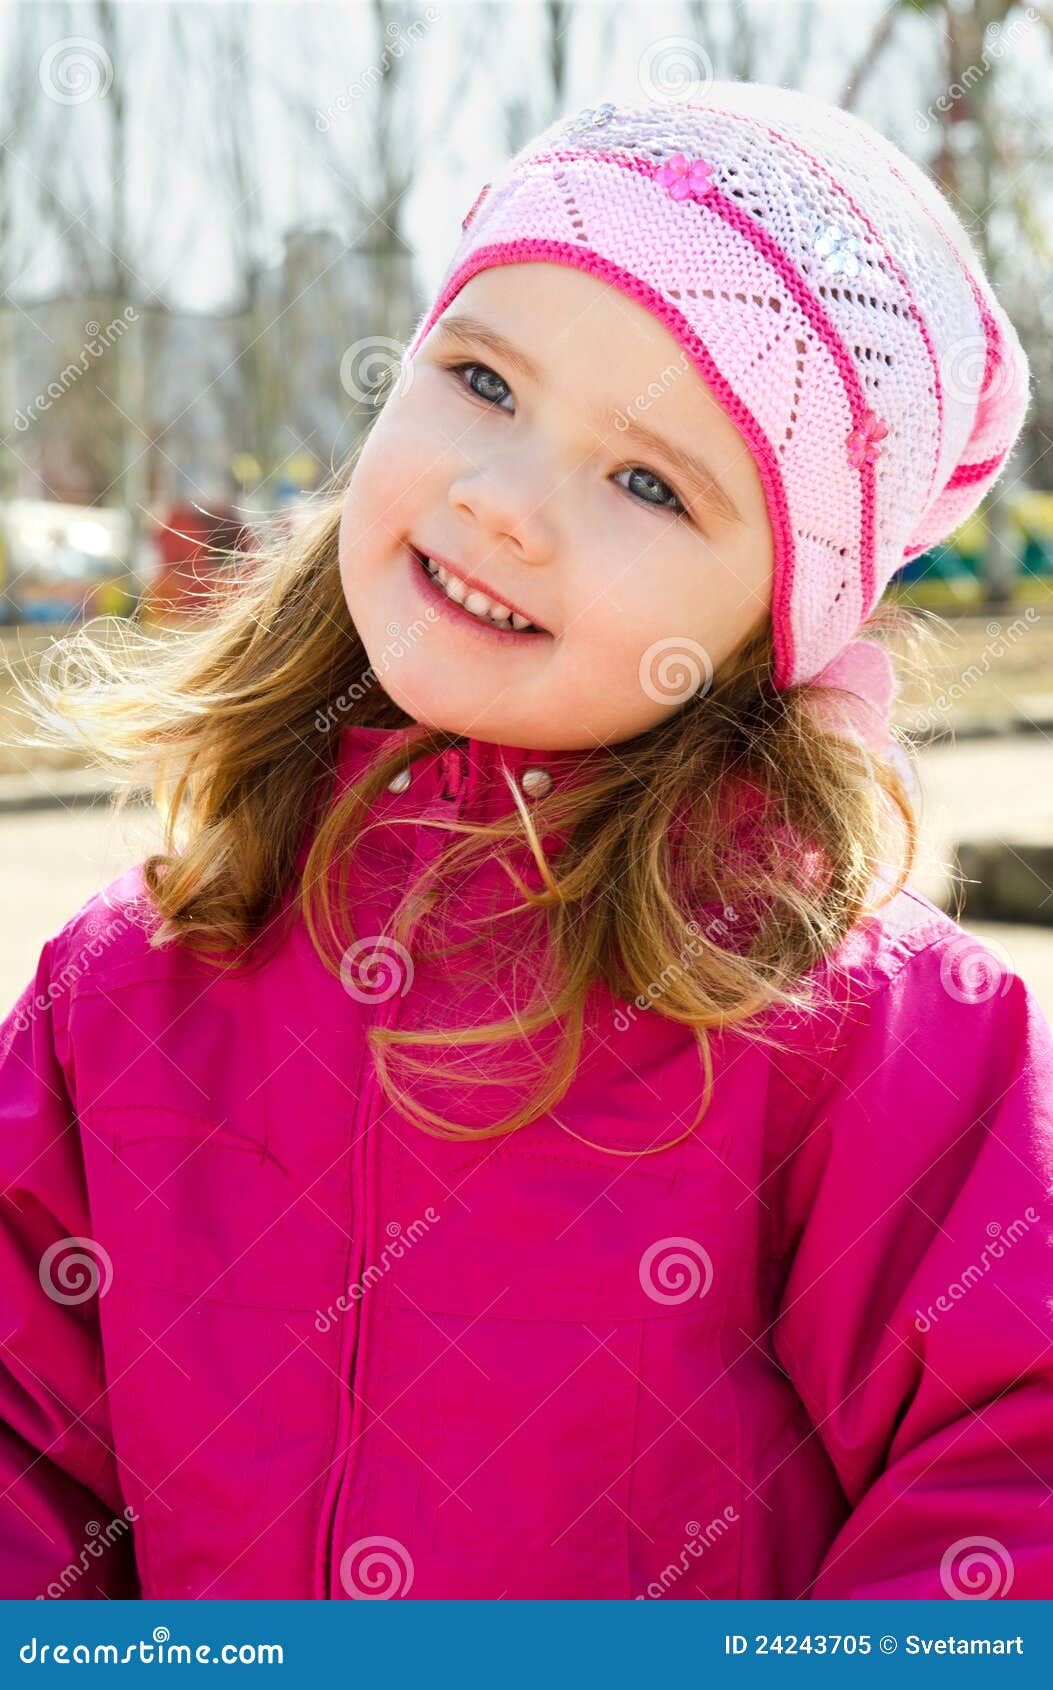 Portrait of Little Girl Outdoors on a Spring Day Stock Image - Image of ...